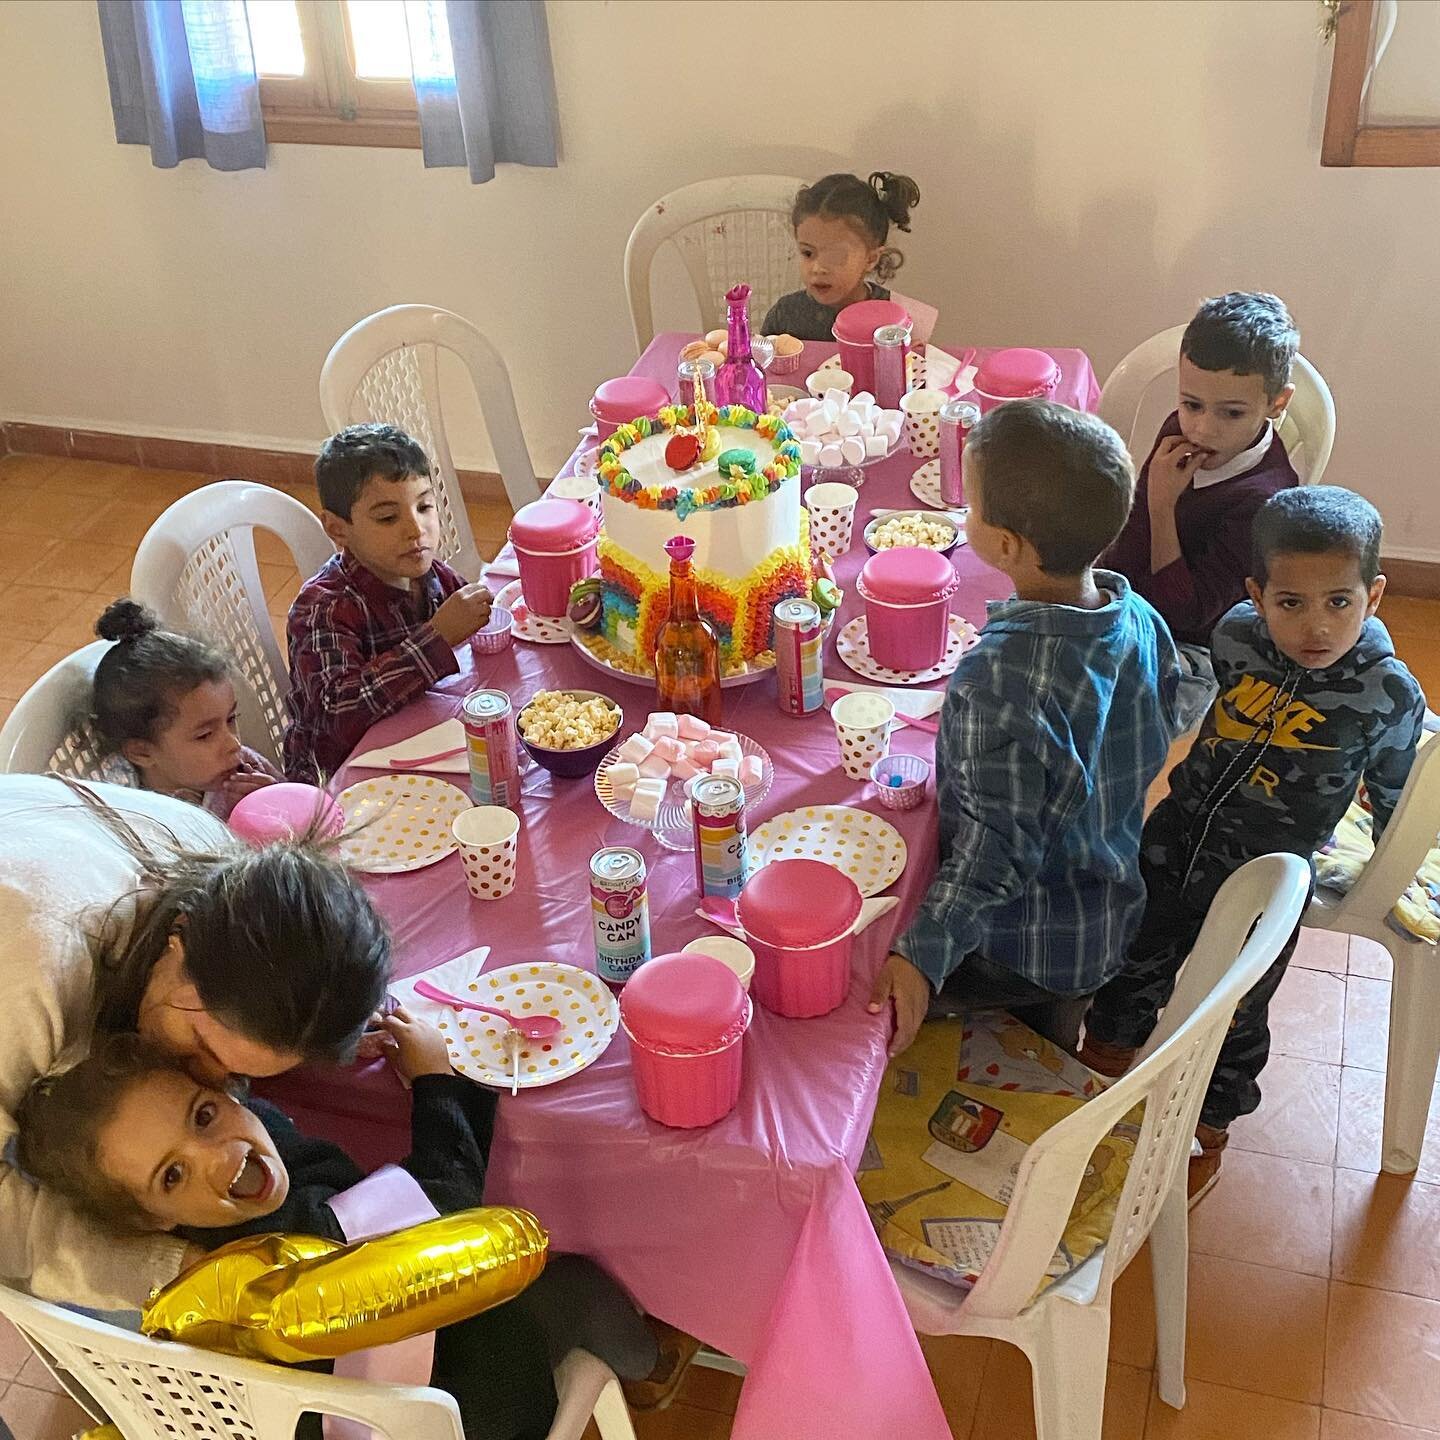 Party time in House 8. We brought a little too much sugar and a little too much fun, but that&rsquo;s how we party in the USA. A special happy birthday to Jinan and Ritaj🎉#happybirthday #girlpower #celebrateverything #collectmomentsnotthings